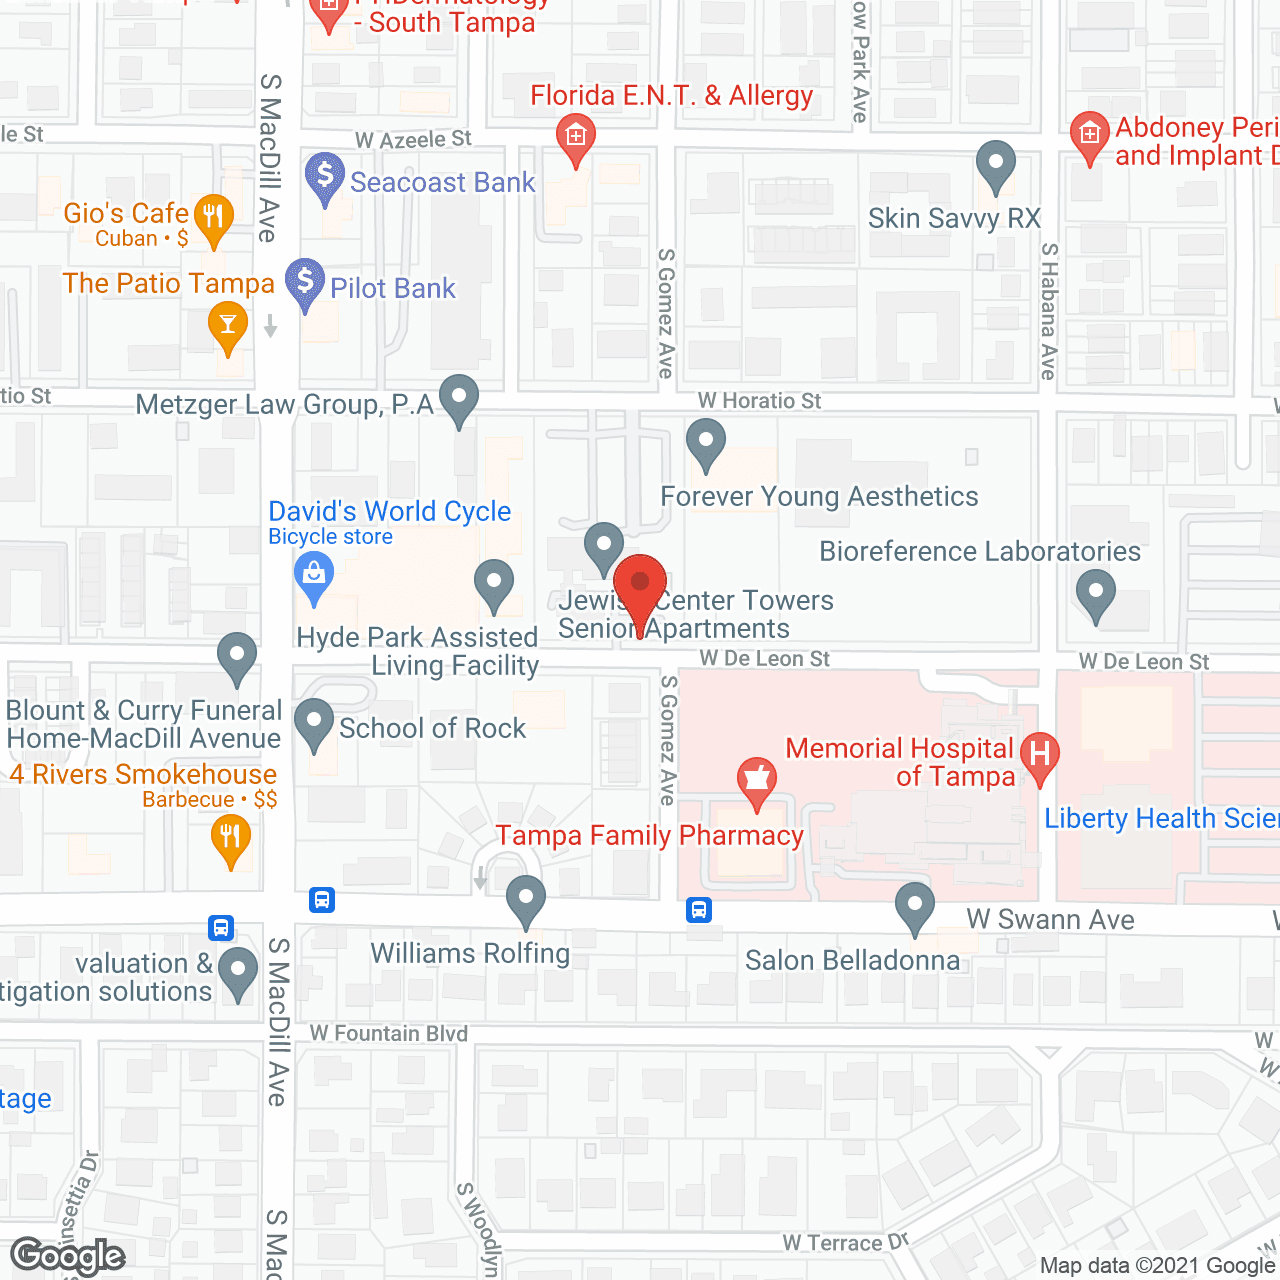 Jewish Center Towers in google map